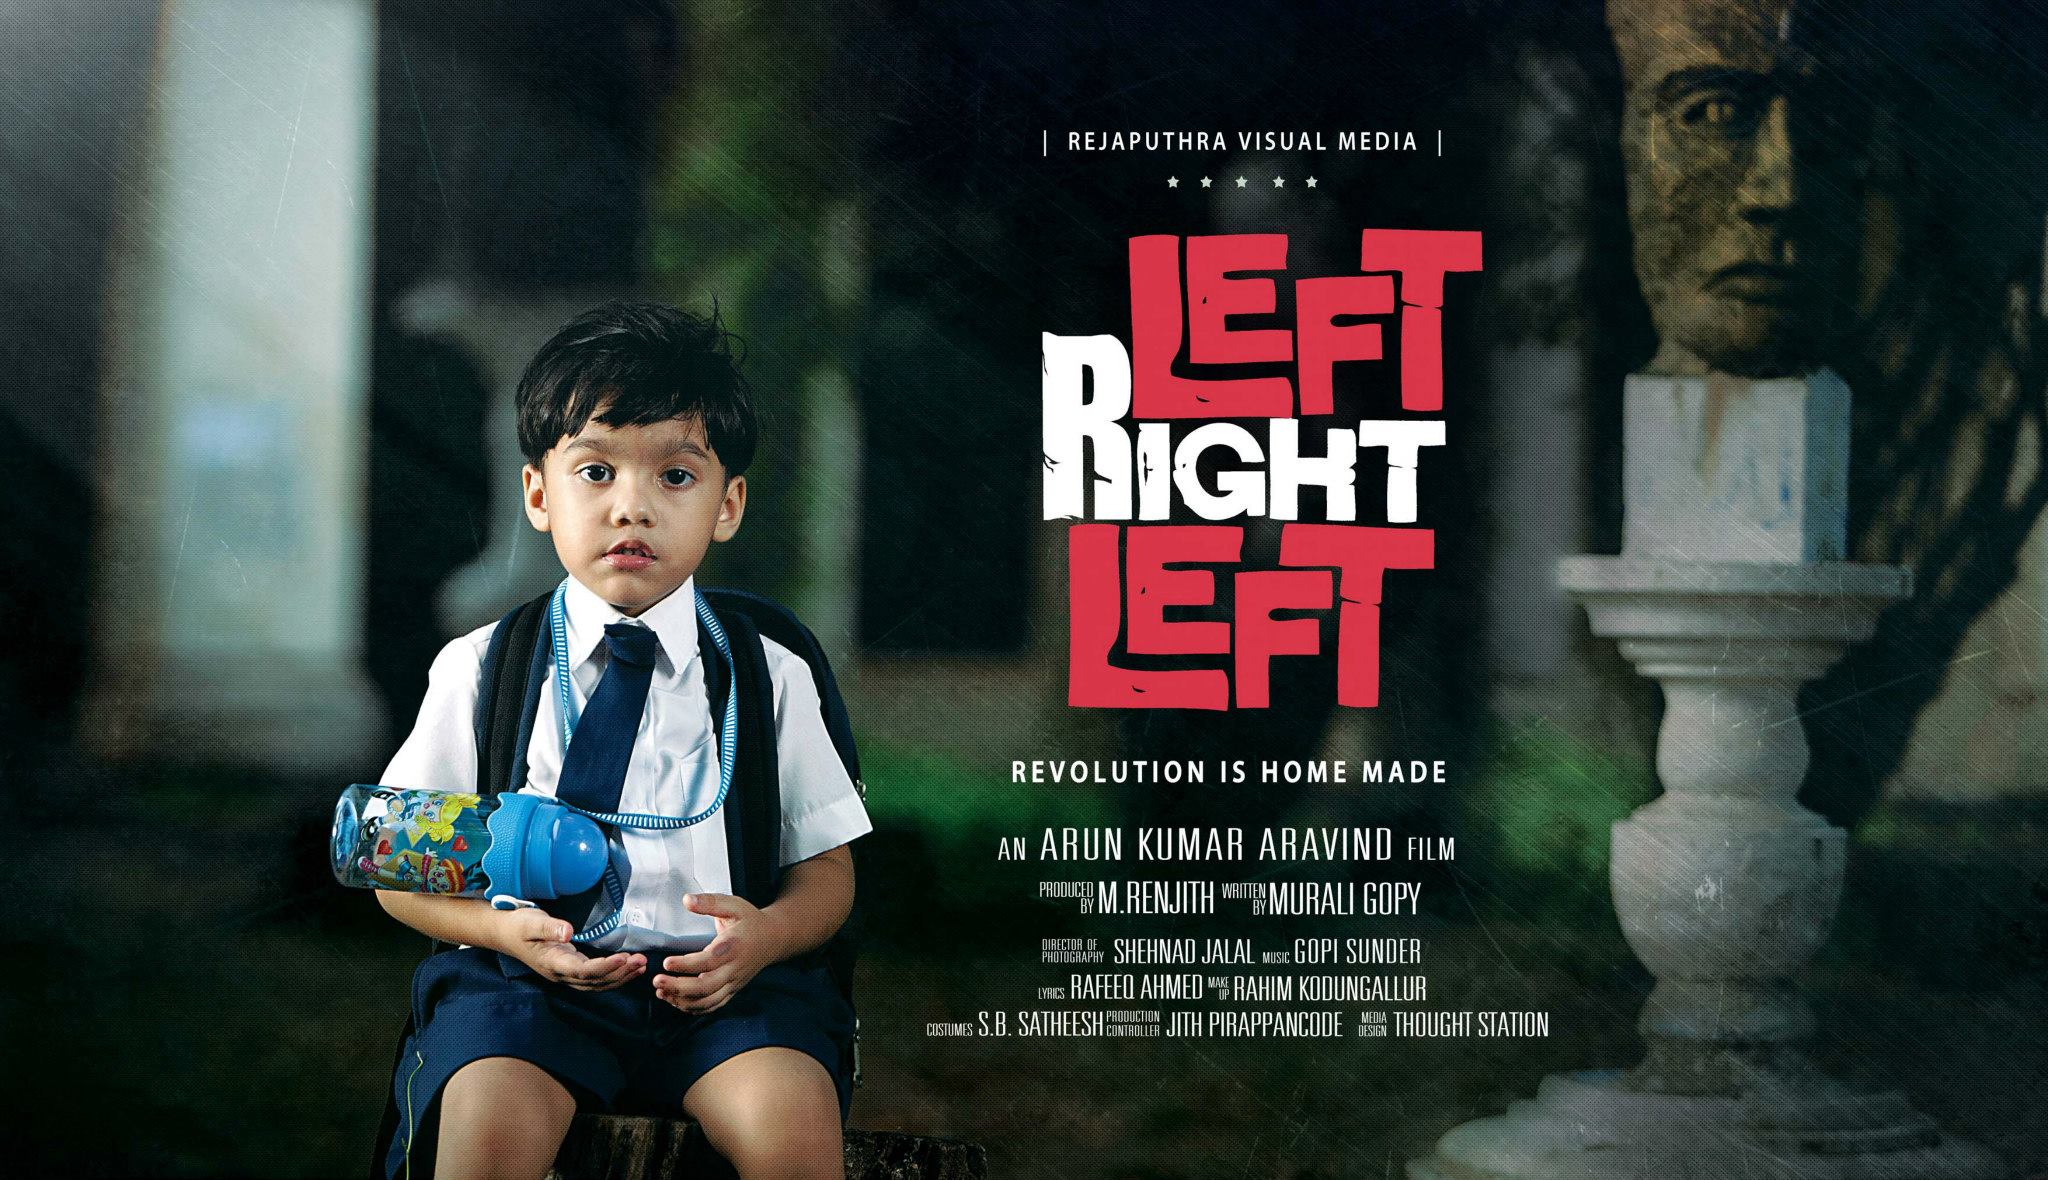 pressure-on-cpm-again-due-to-left-right-left-malayalam-movie